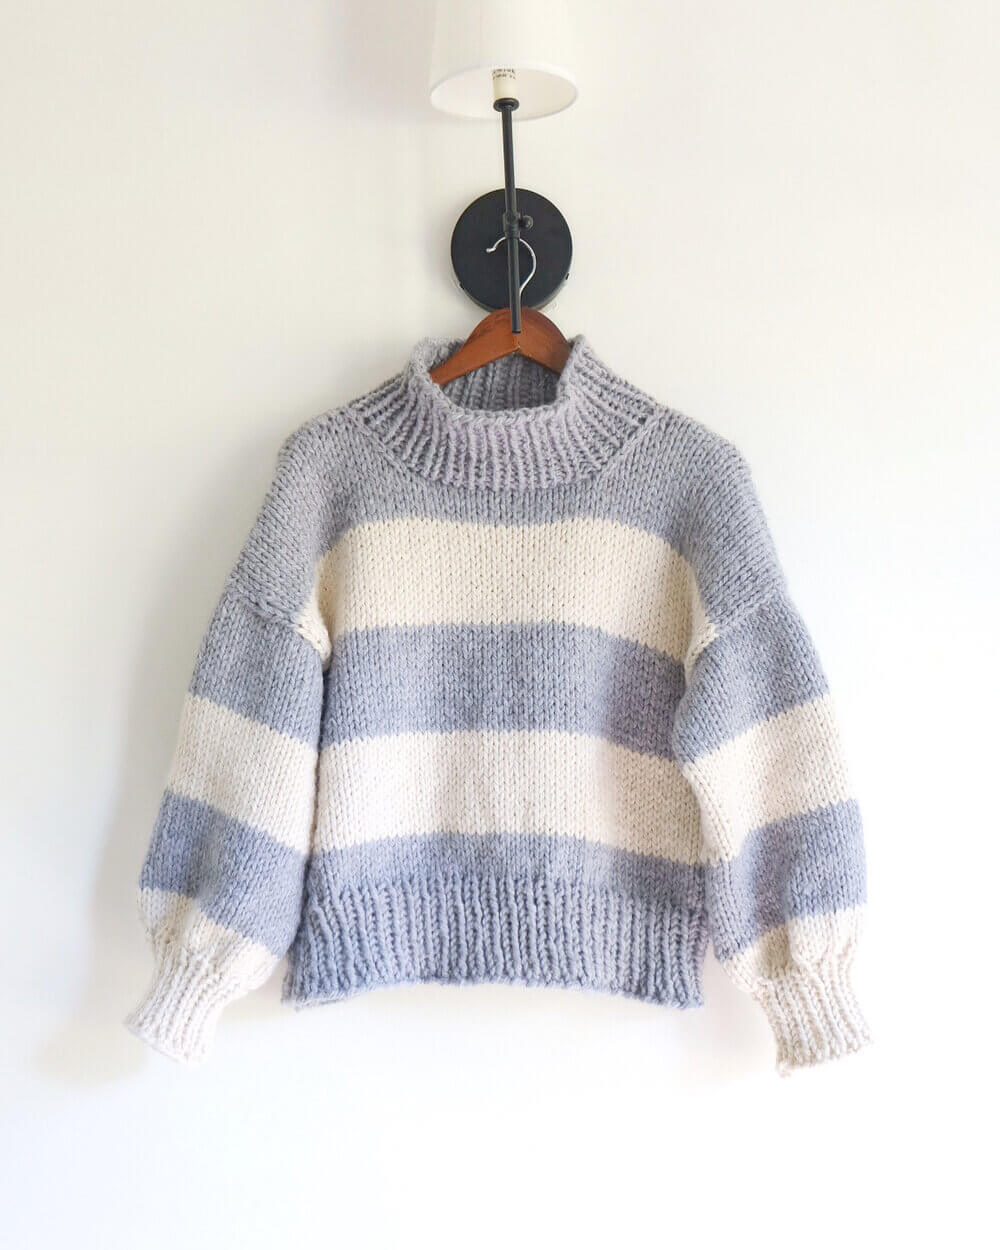 Oversized Baggy White And Blue Strap Pullover Knitting Pattern: Easy Sweater Knitting Patterns